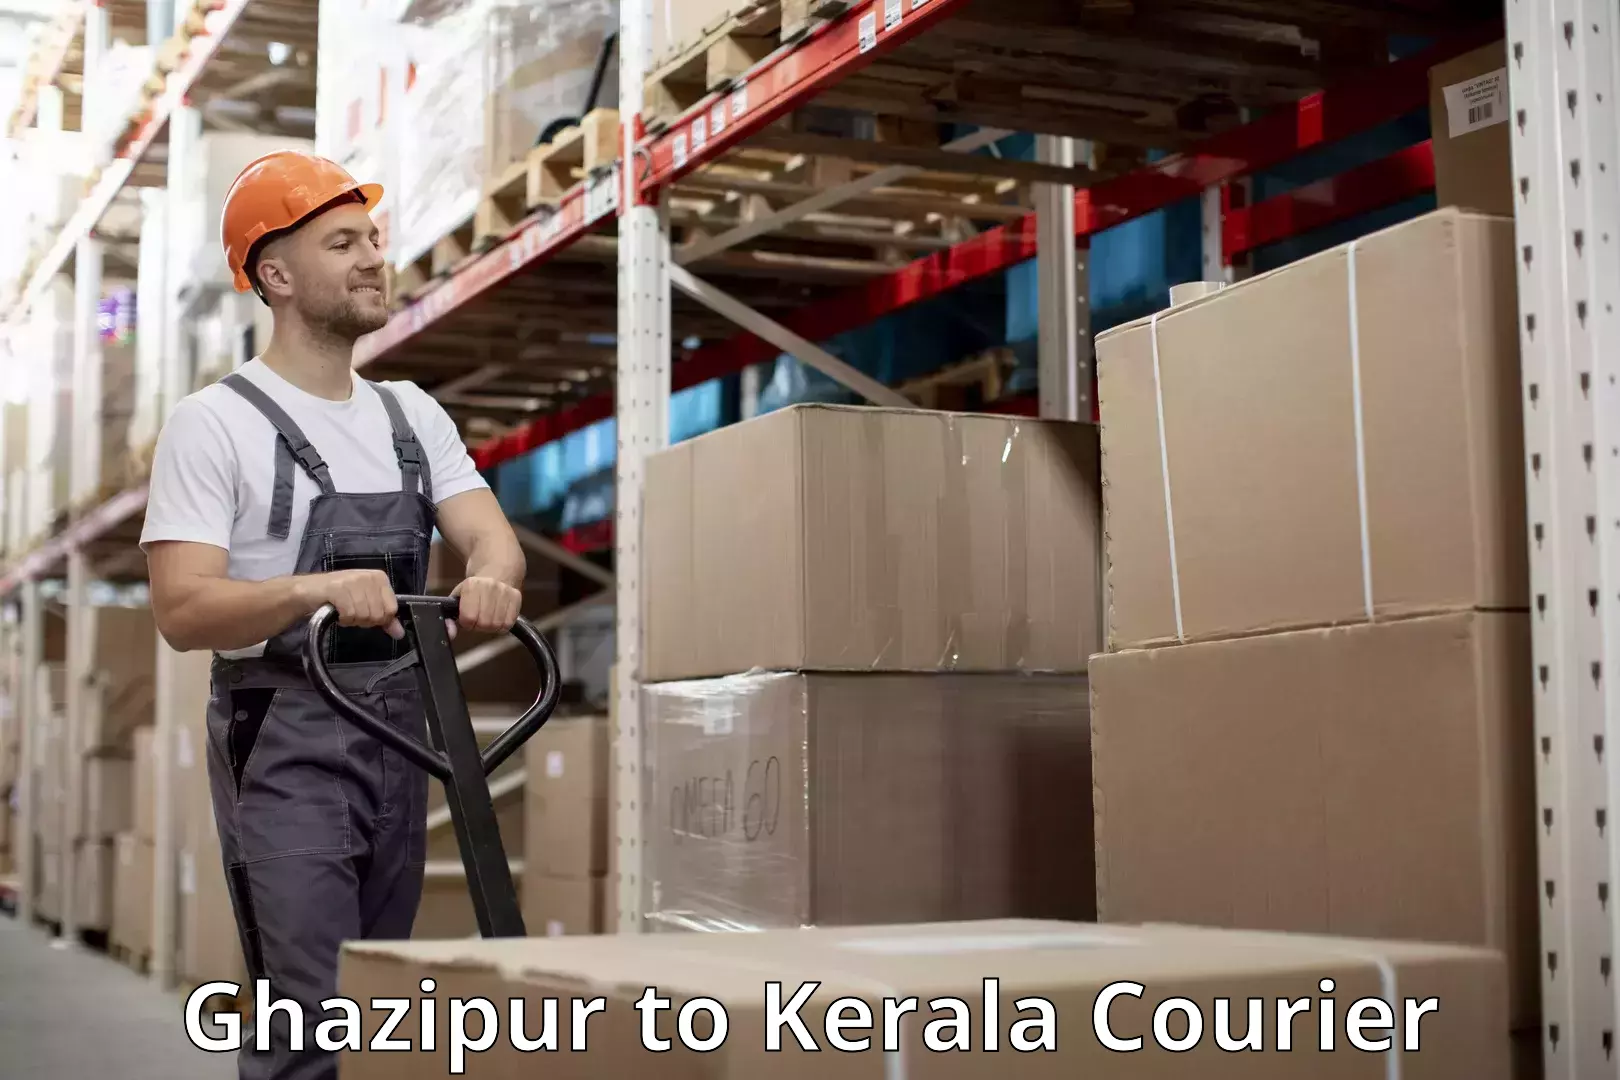 Luggage transport company Ghazipur to Kerala